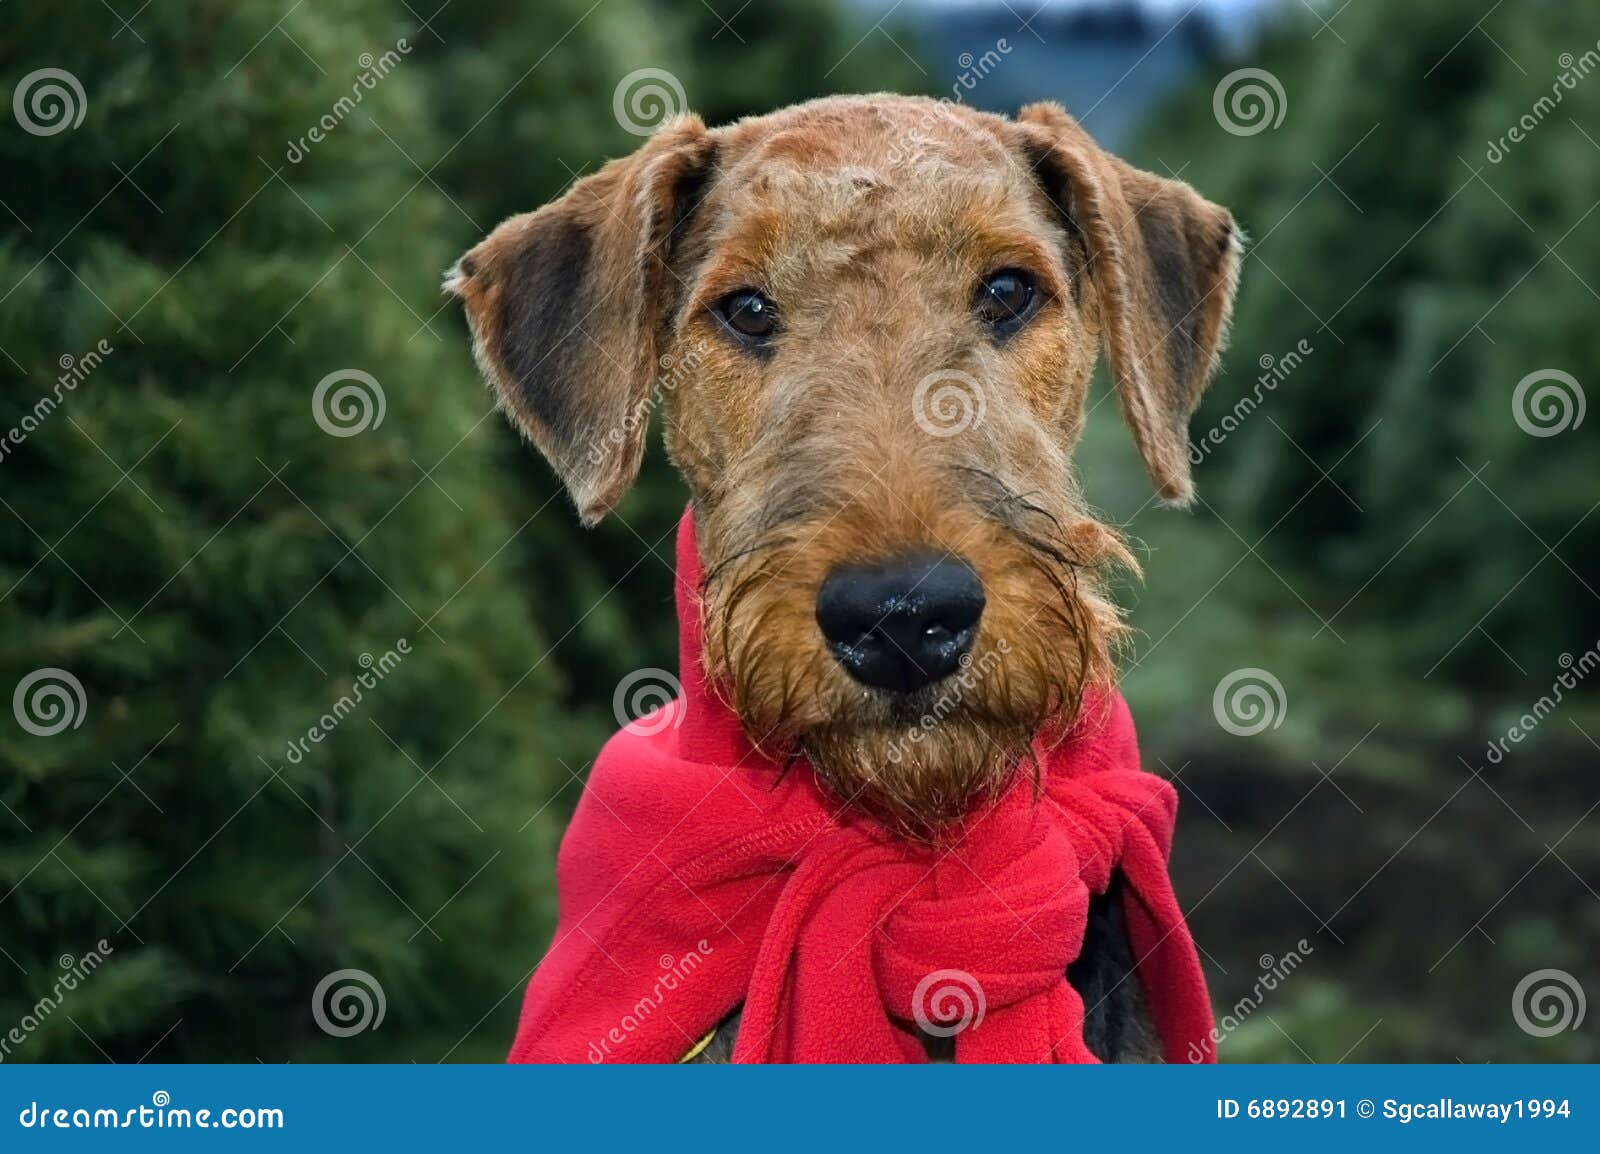 Dog In Christmas Trees Stock Image - Image: 6892891